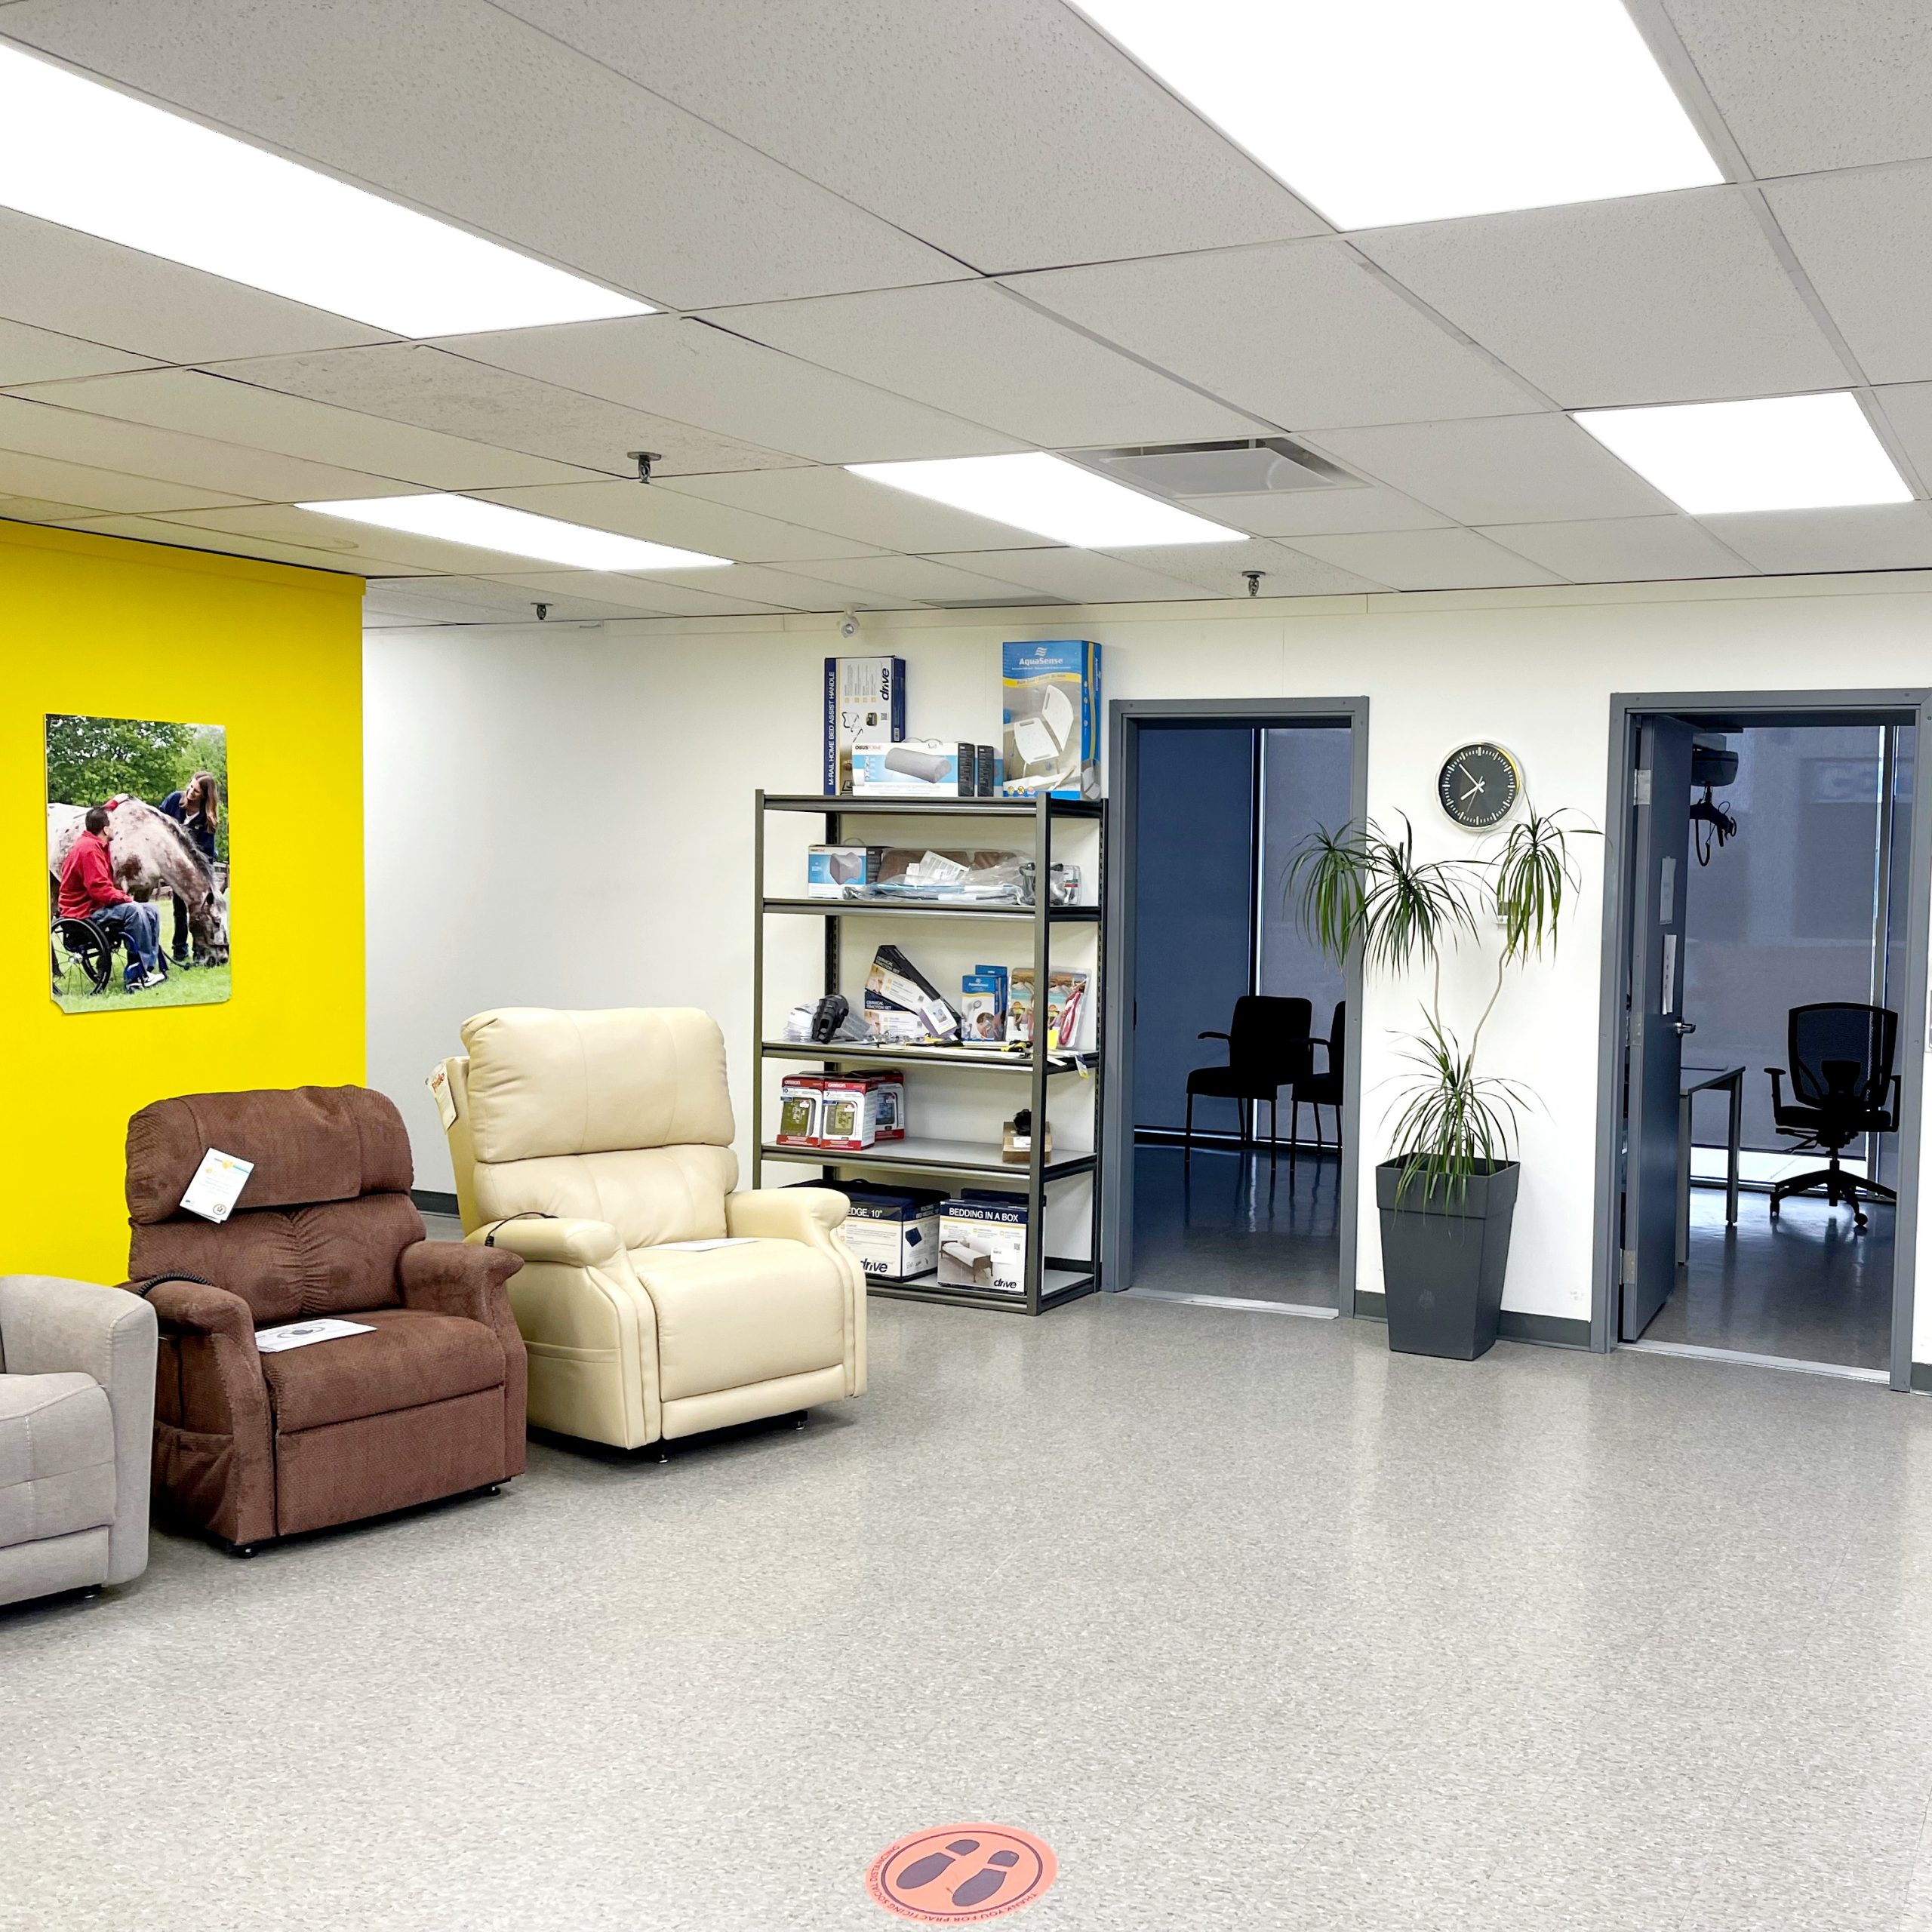 Calgary showroom and entrance to private assessment rooms